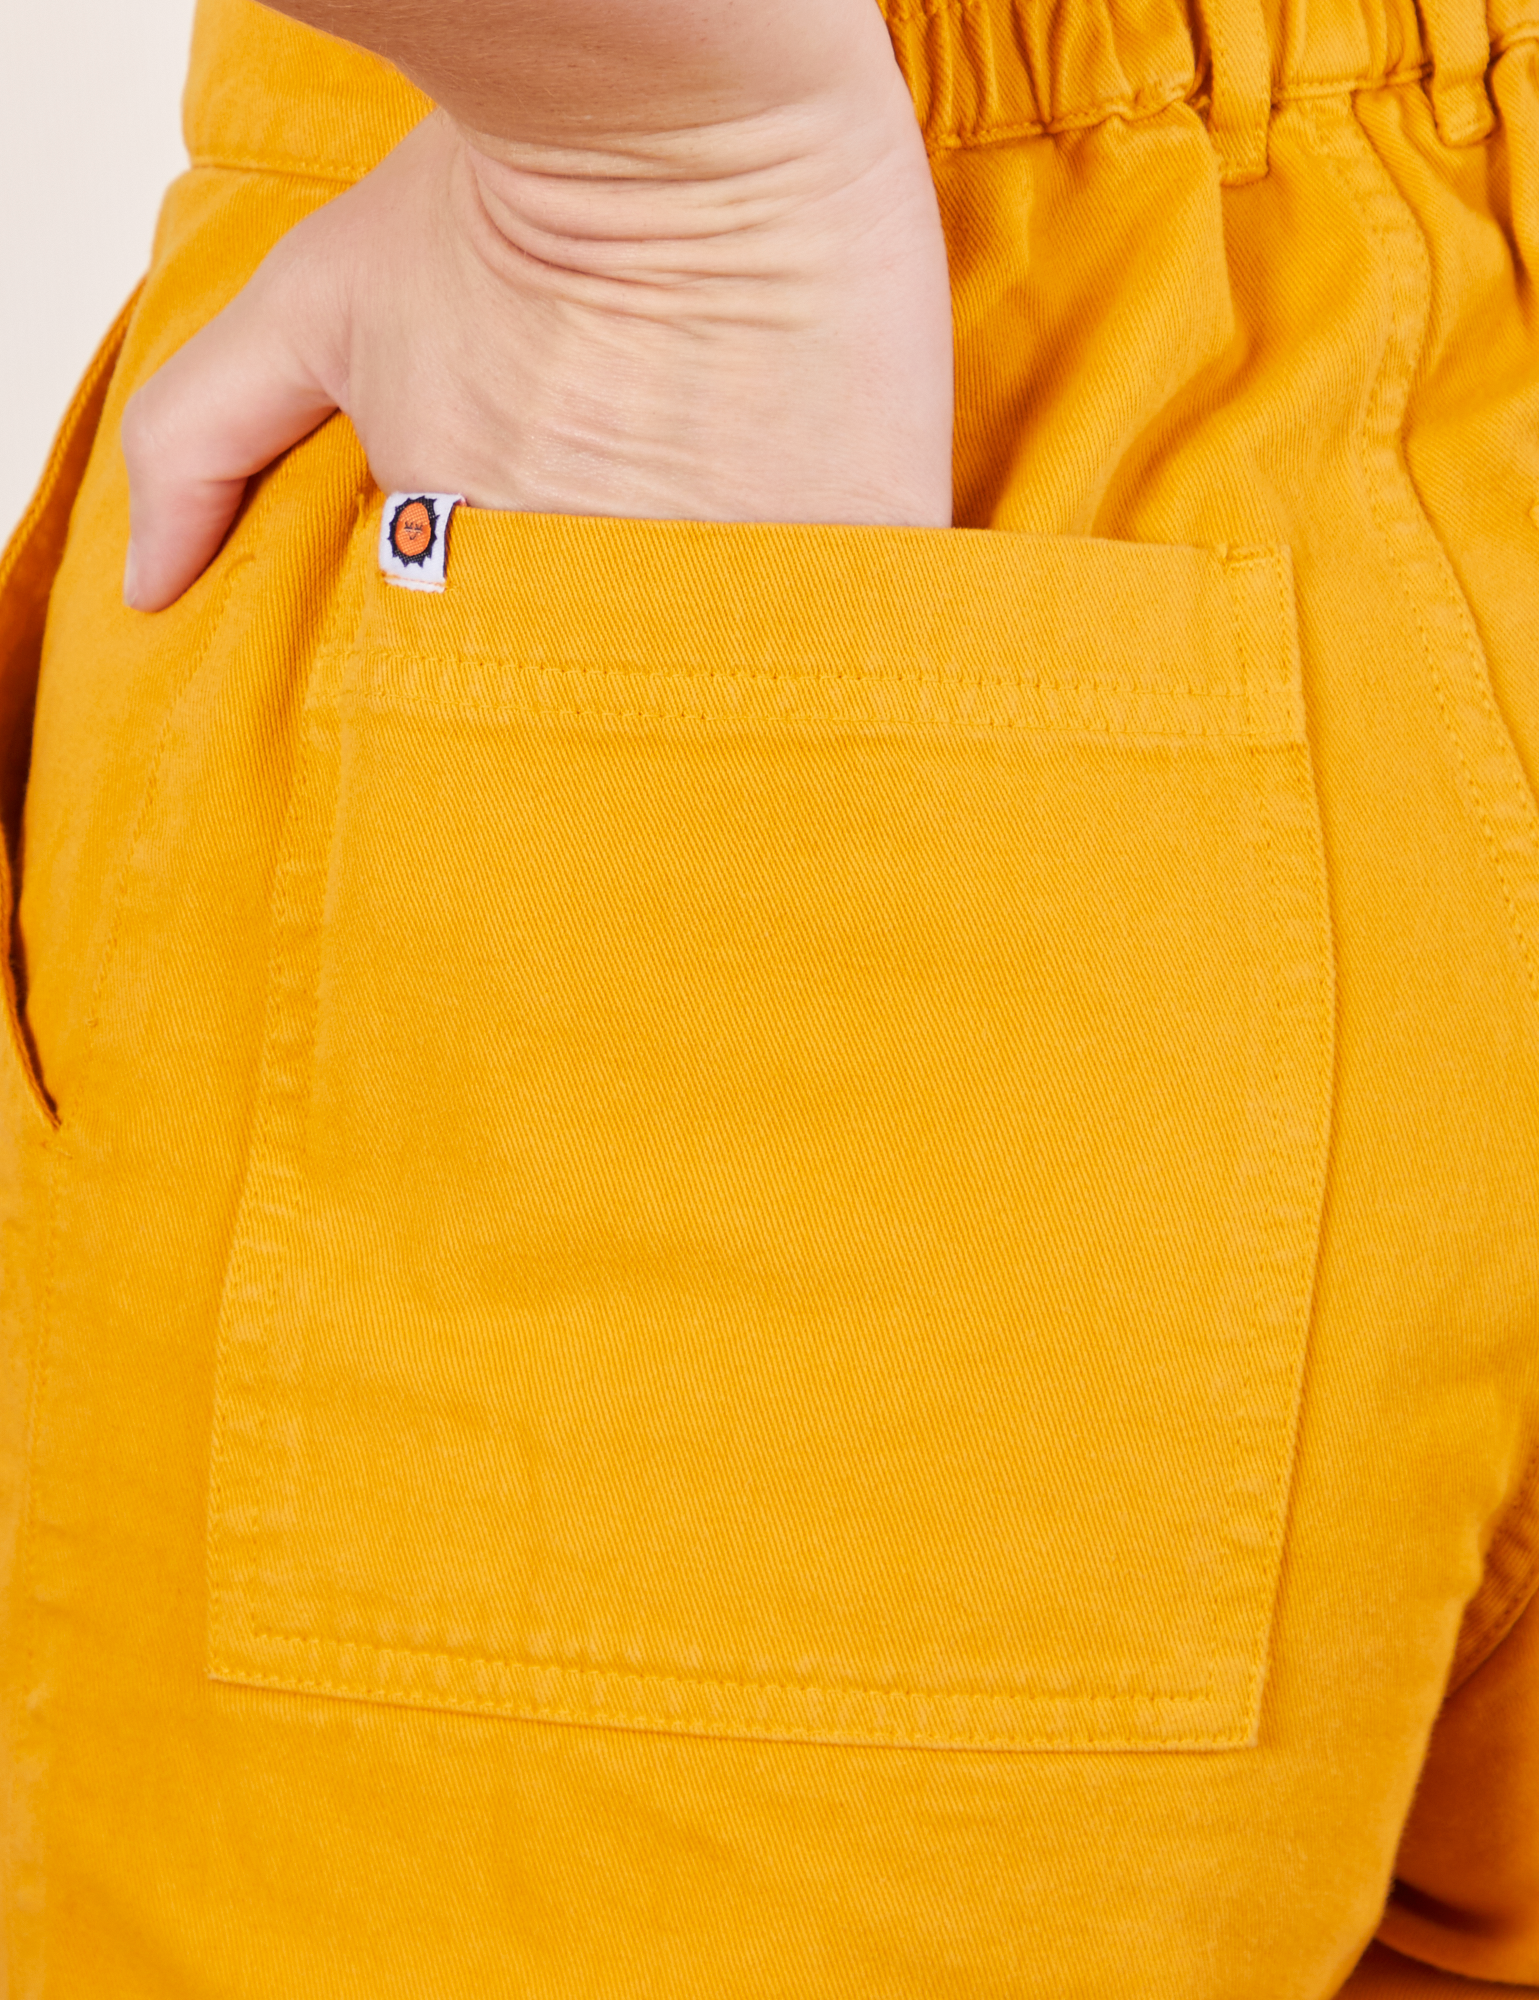 Back pocket close up of Short Sleeve Jumpsuit in Mustard Yellow. Alex has her hand in the pocket.